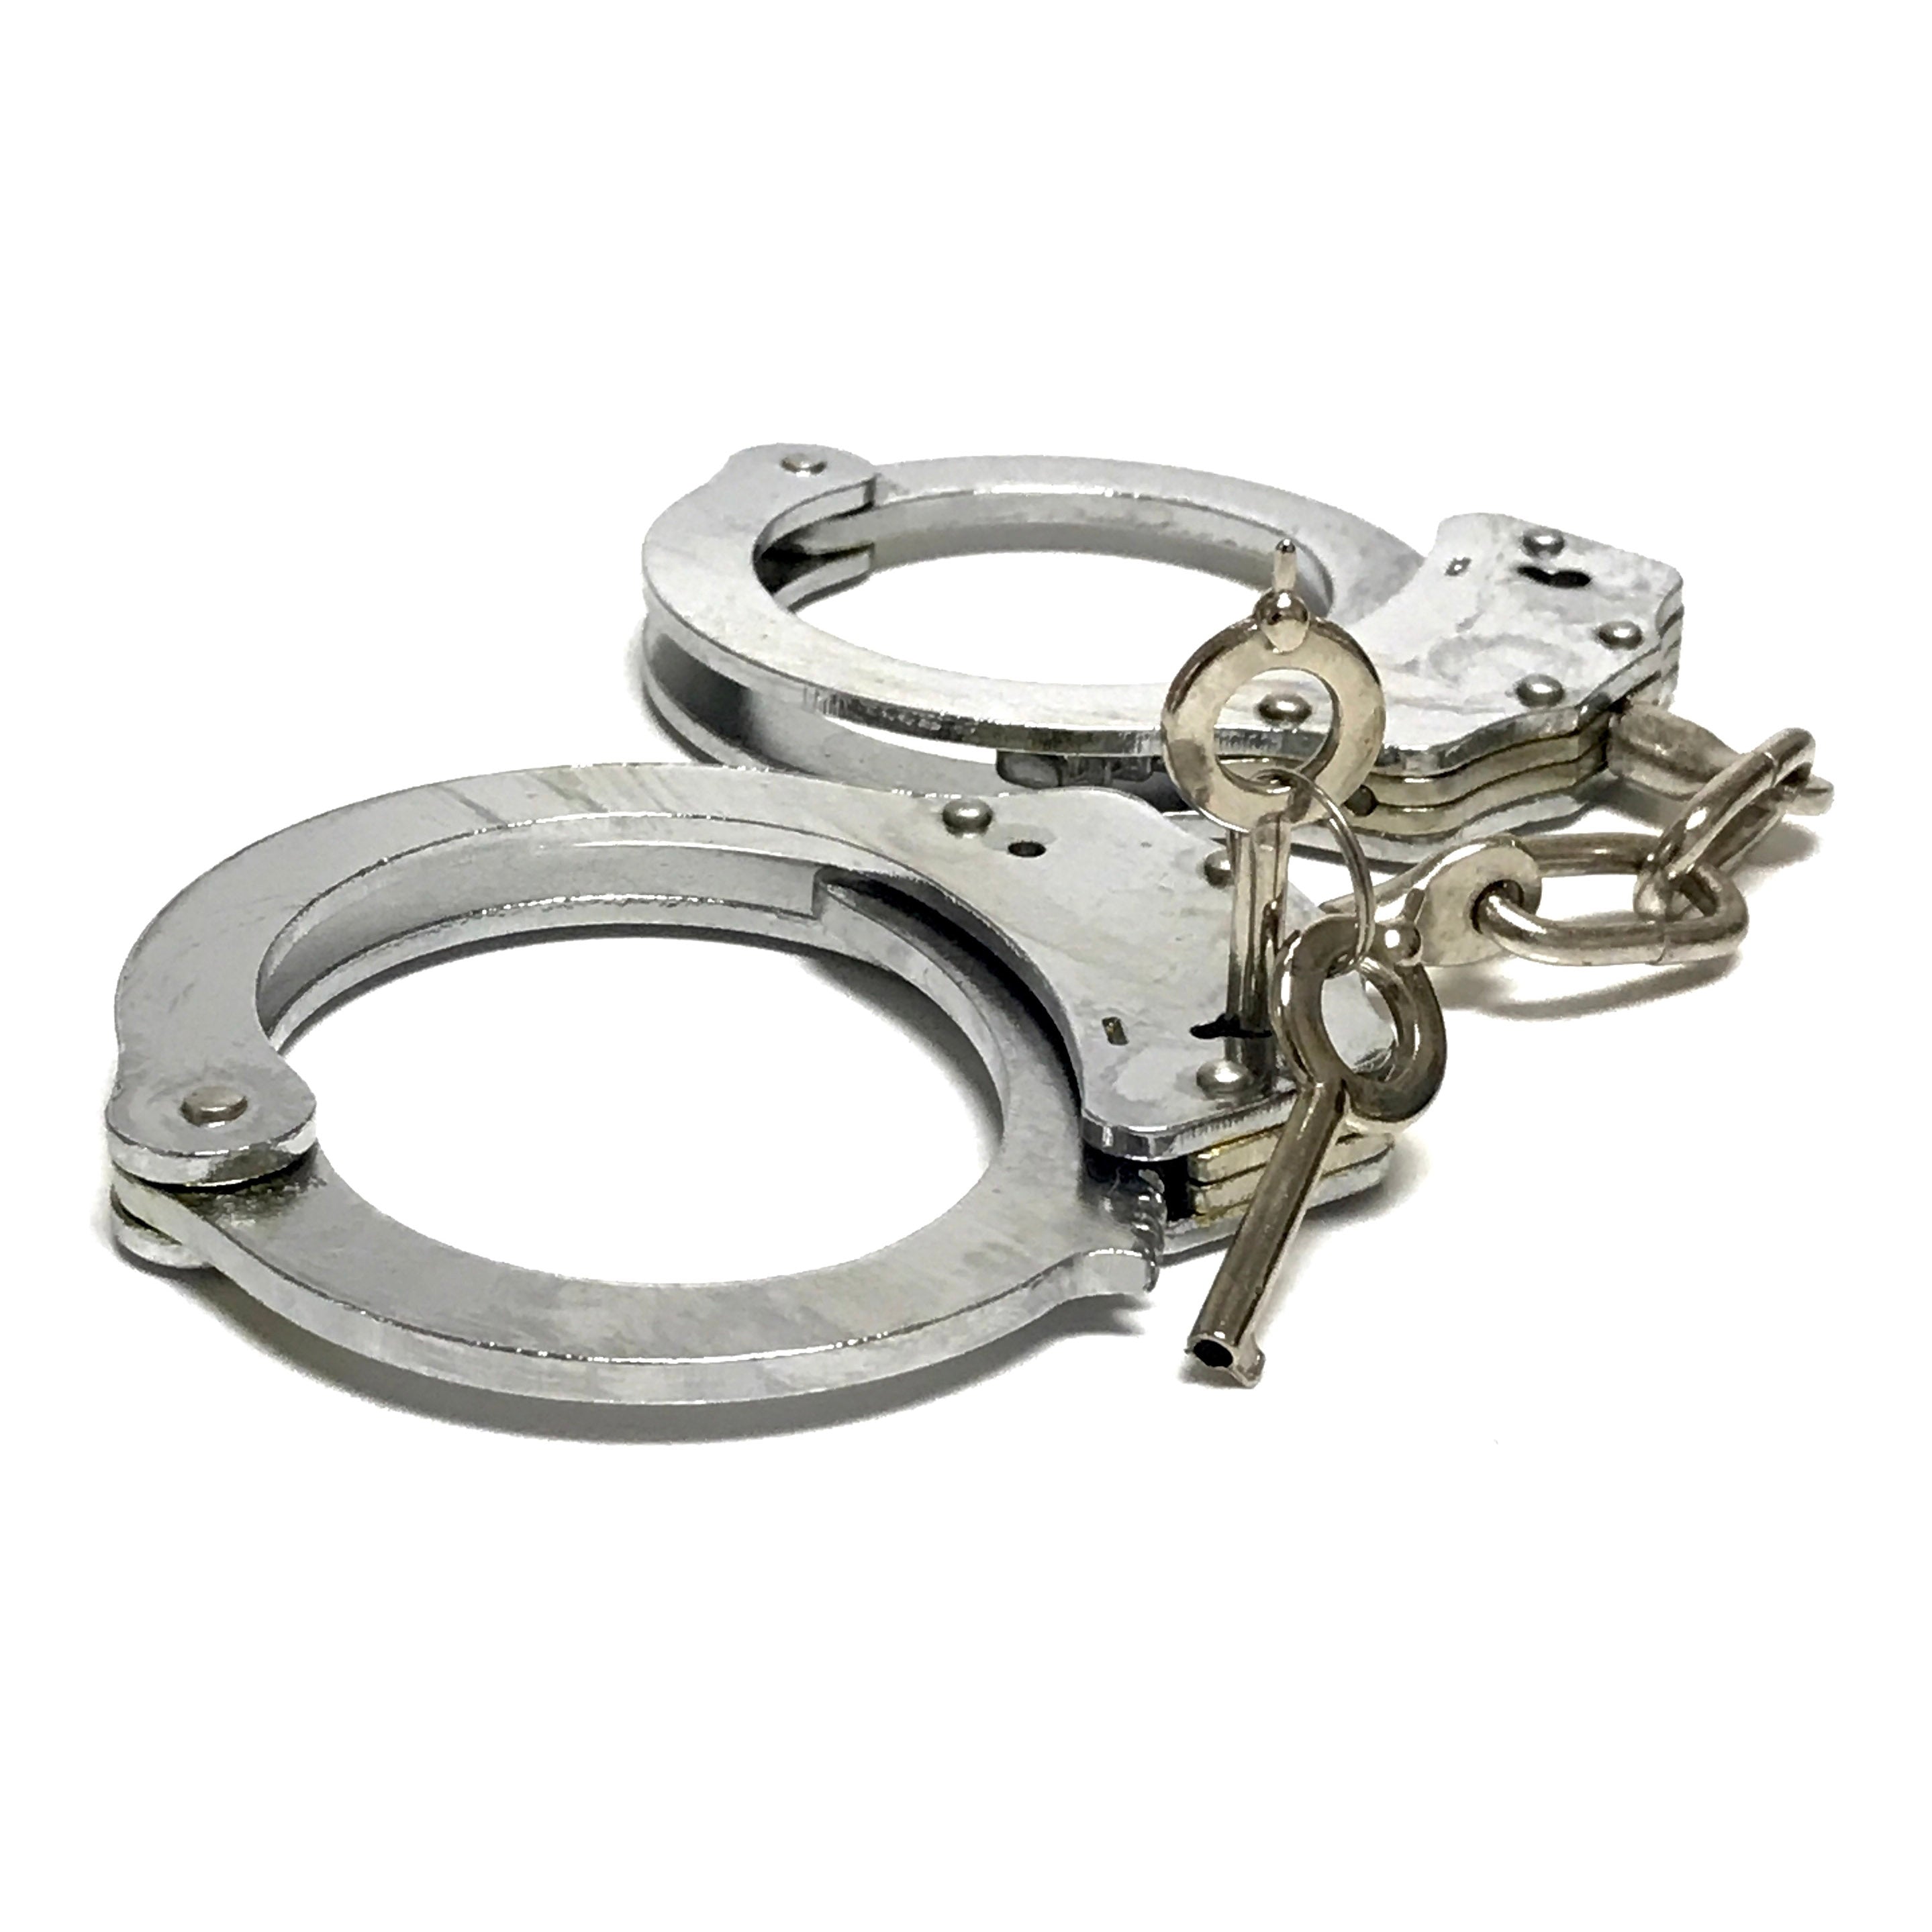 Deluxe Double Lock Stainless Steel Chained Handcuffs with Key - Fully Functional Locking Prop